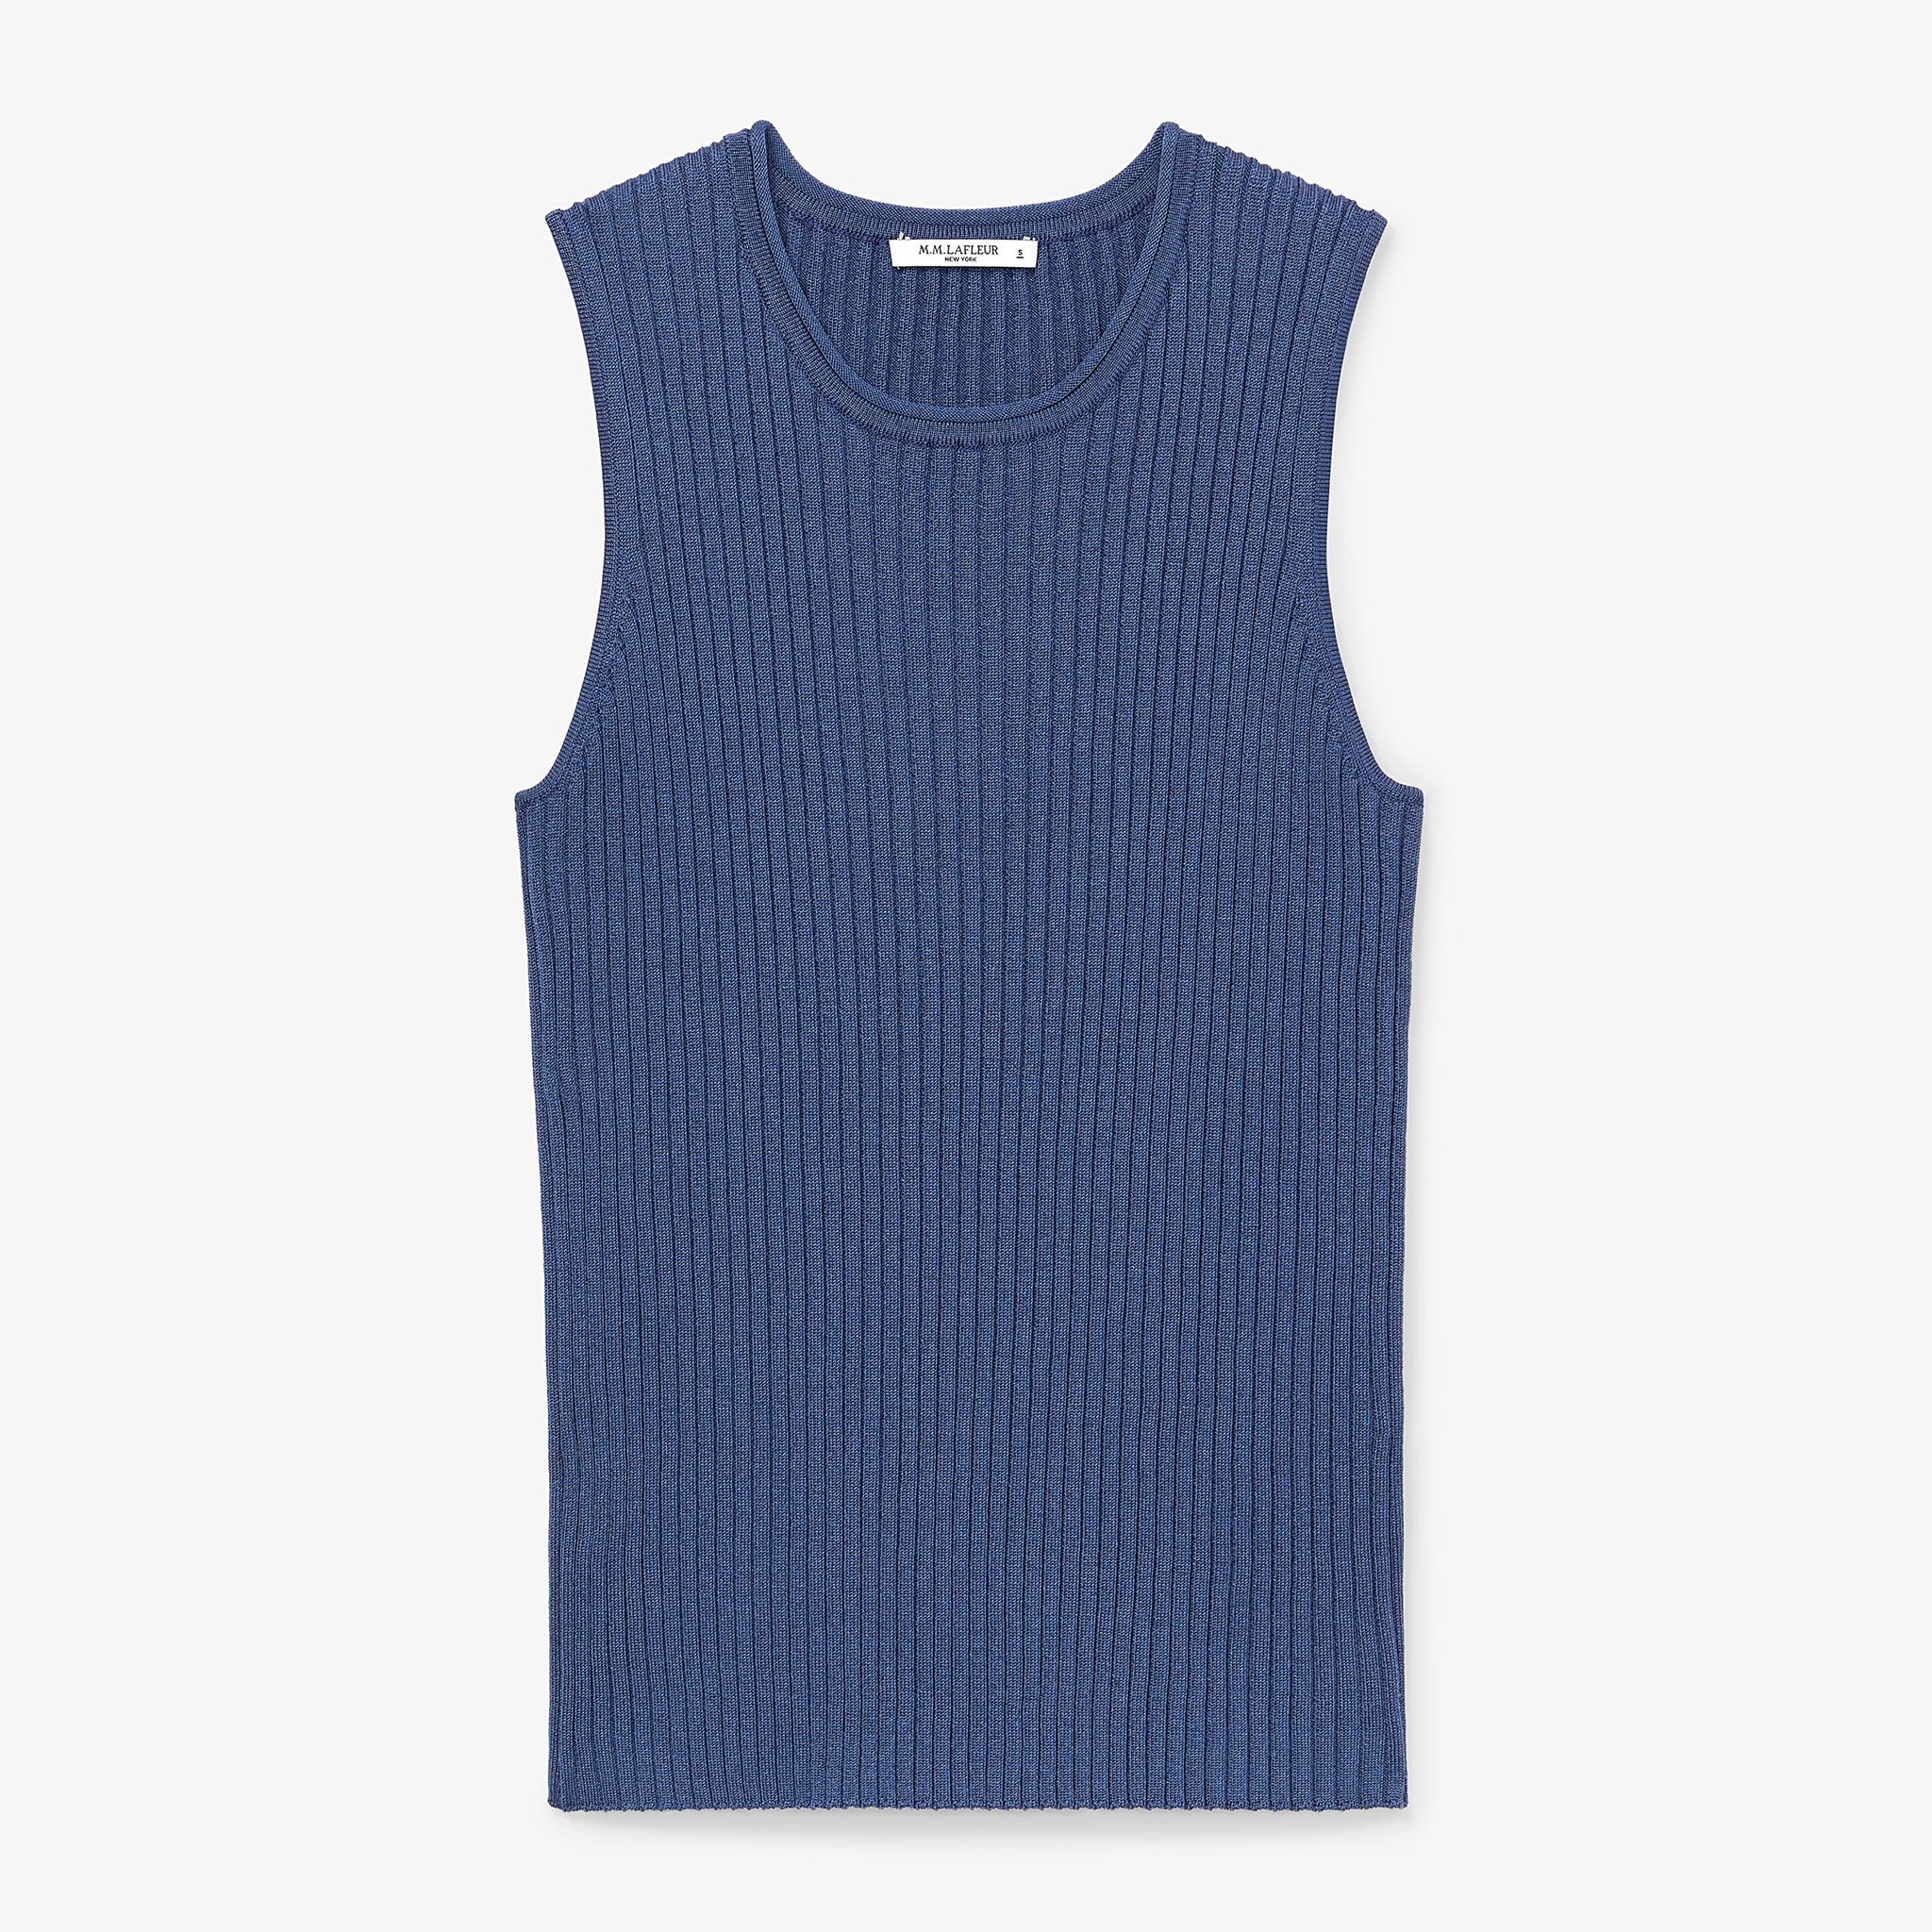 packshot image of the Avery Top—Slinky Knit in Adriatic Blue